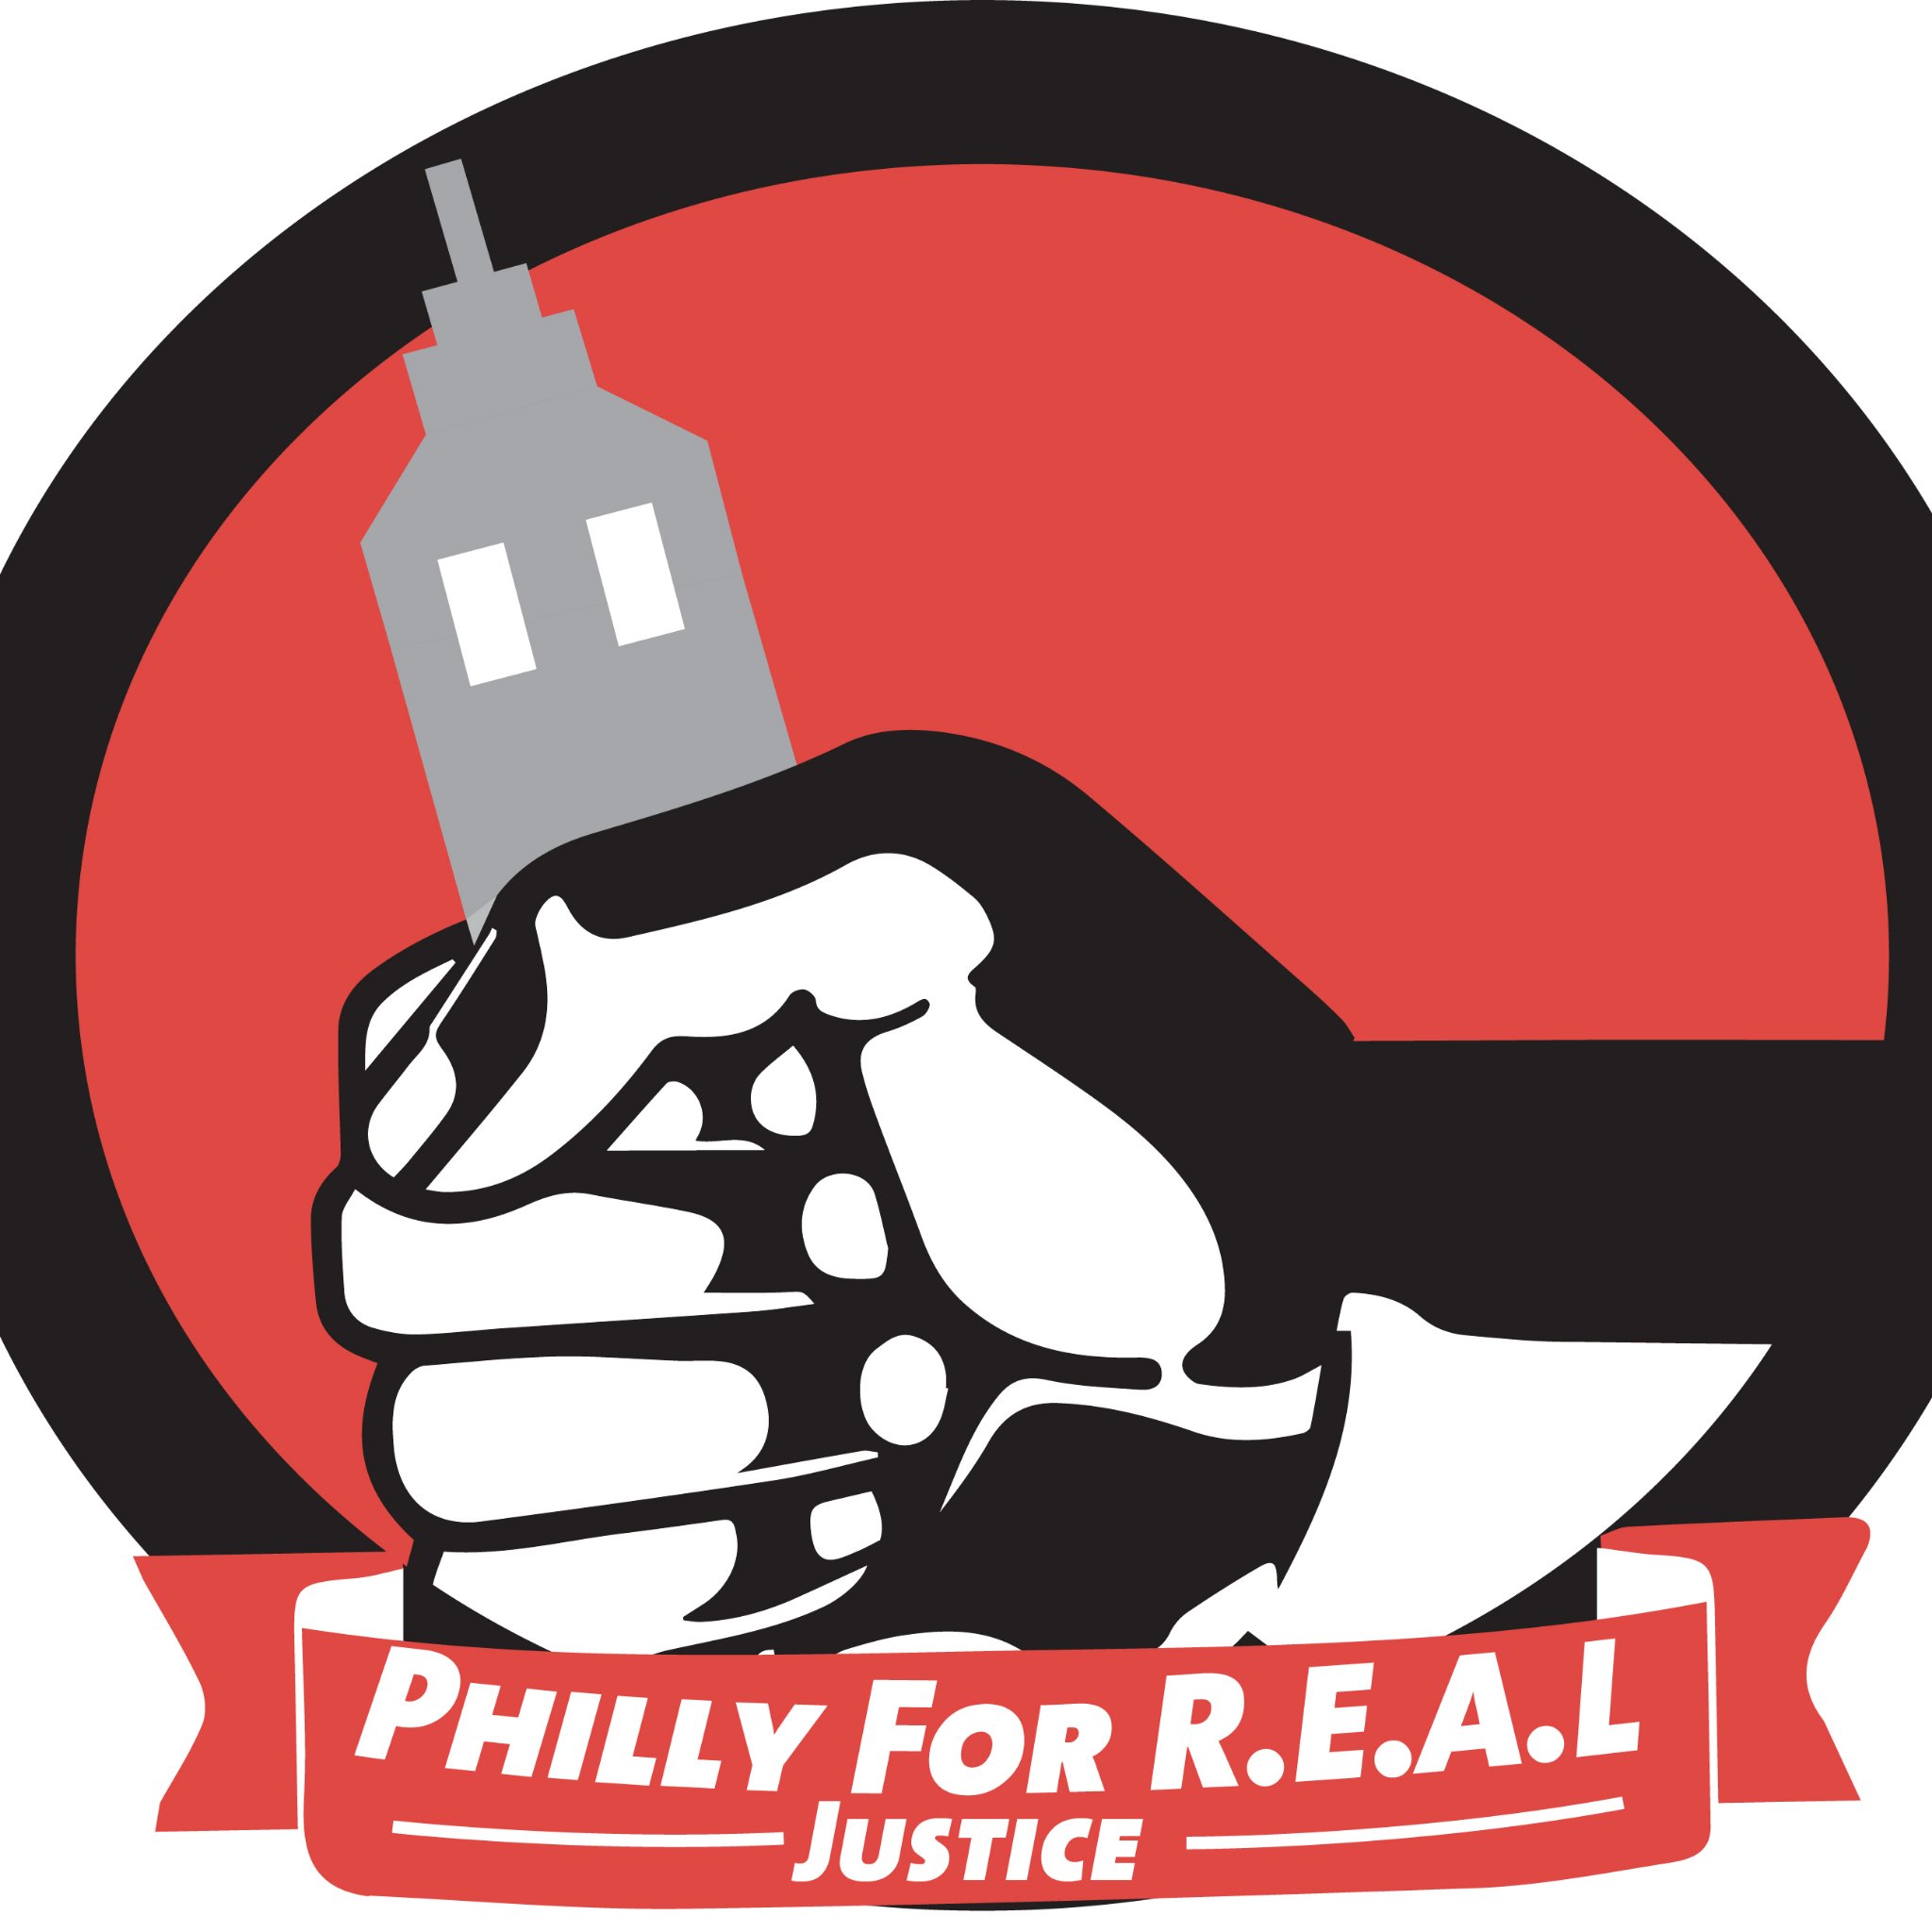 R.E.A.L. Justice is a police and prison abolition org. We challenge our city to think beyond policing as it exists now. 
Former acct: @RealJusticePHL